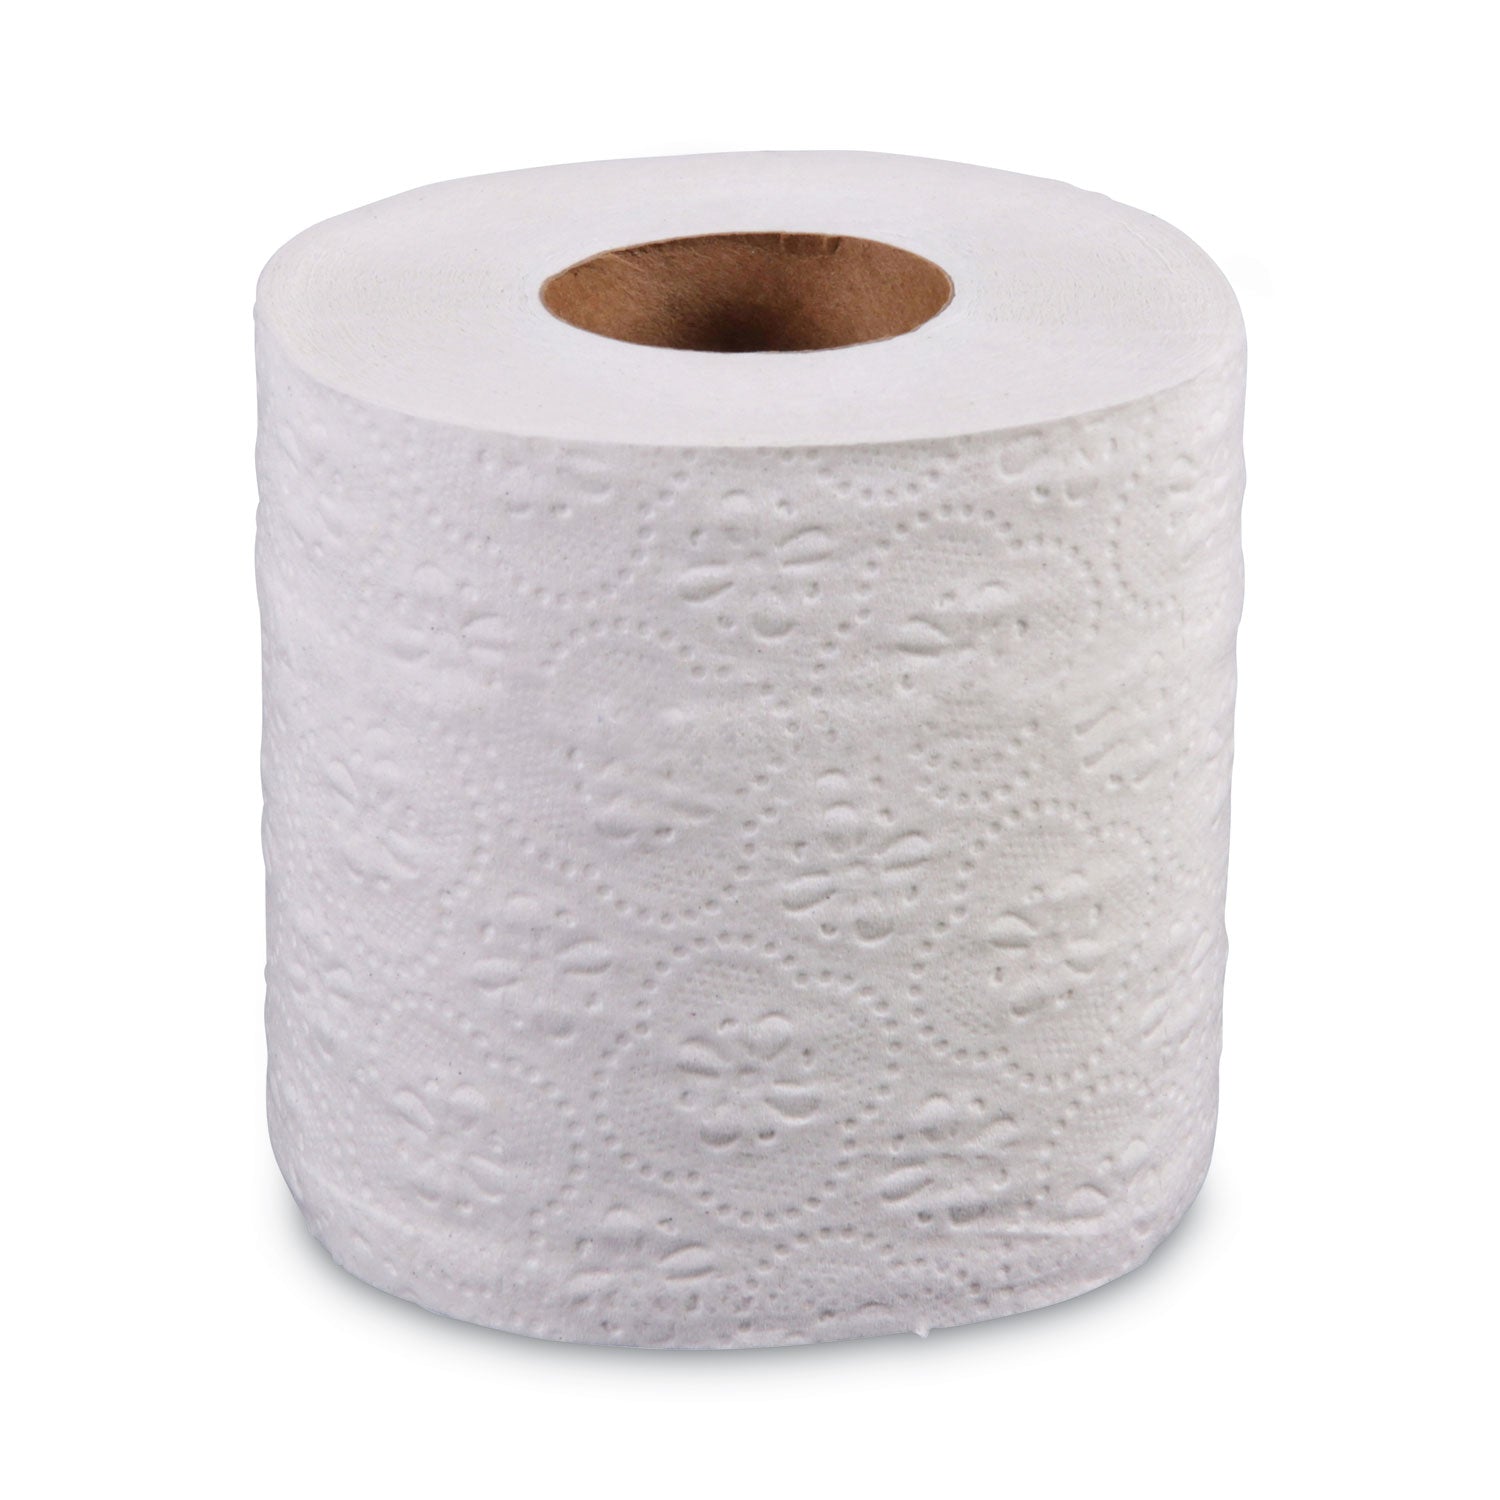 2-Ply Toilet Tissue, Standard, Septic Safe, White, 4 x 3, 500 Sheets/Roll, 96 Rolls/Carton - 